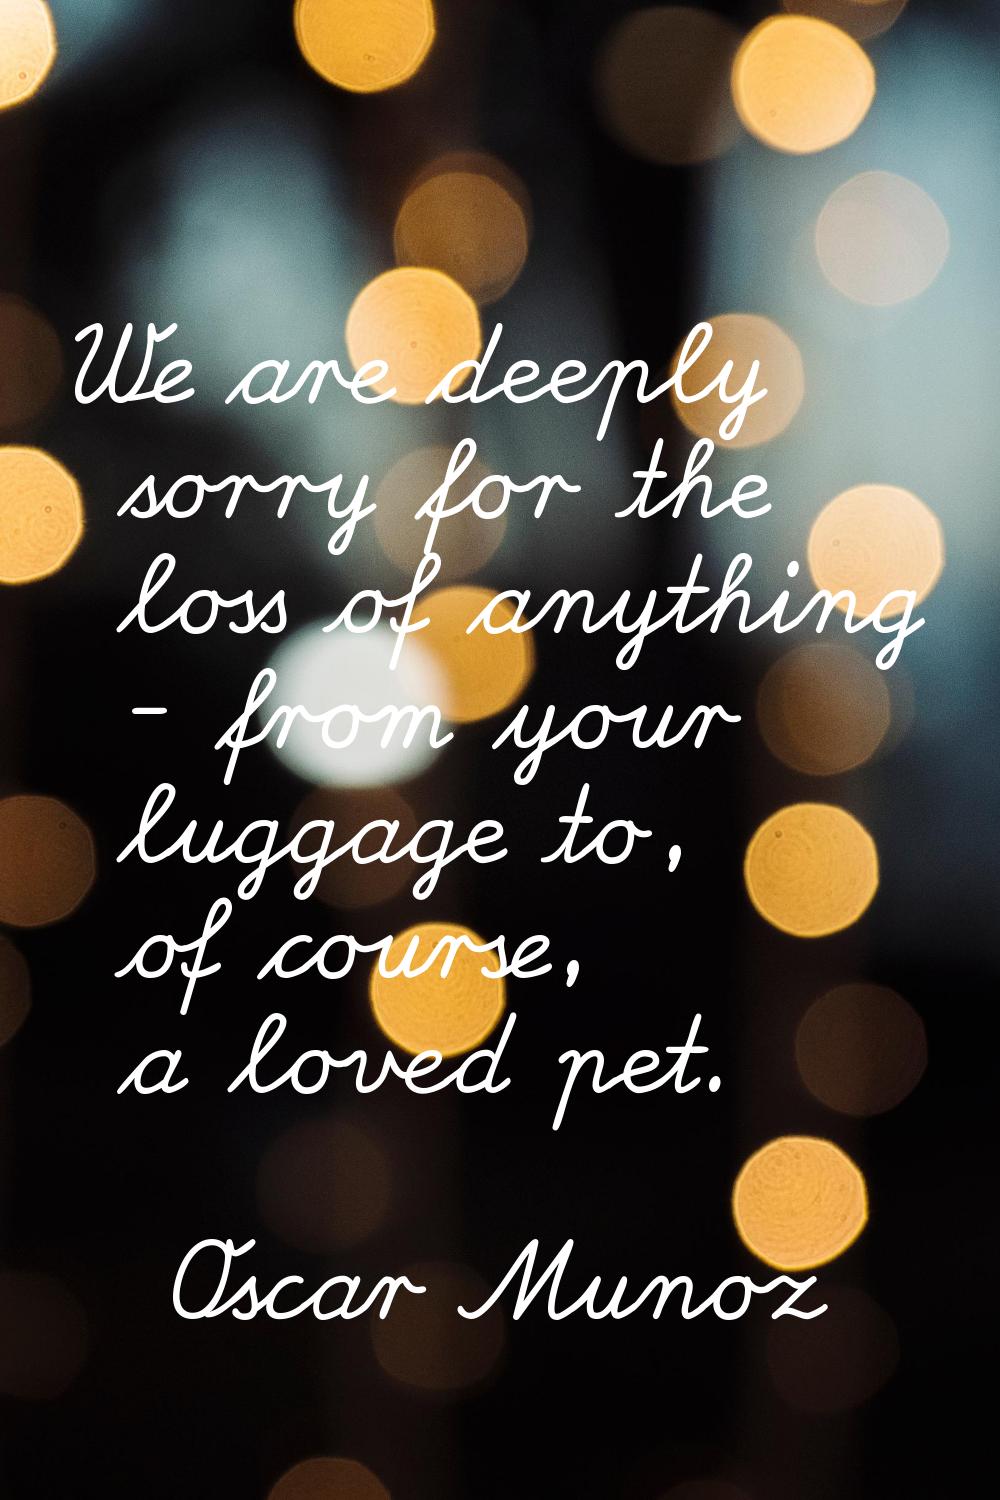 We are deeply sorry for the loss of anything - from your luggage to, of course, a loved pet.